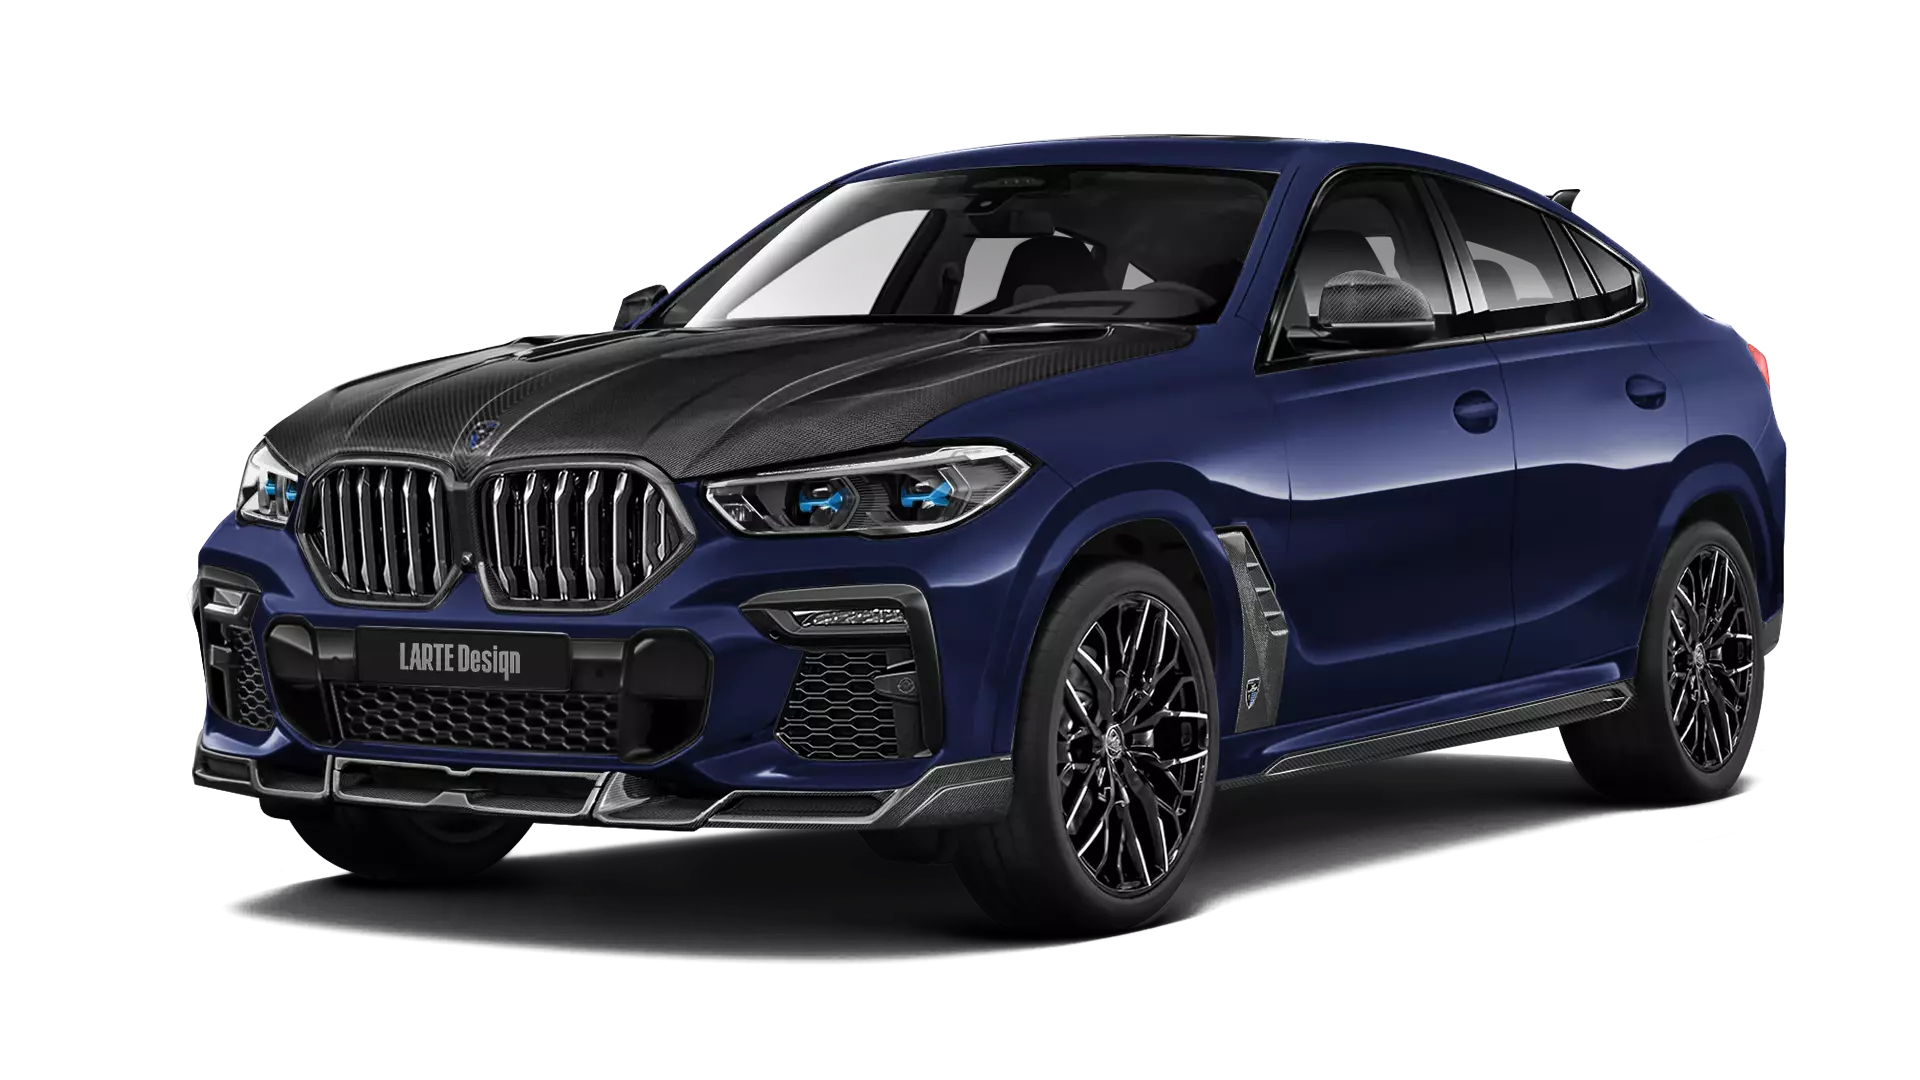 BMW X6 G06 with carbon body kit: front view shown in Tanzanite Blue